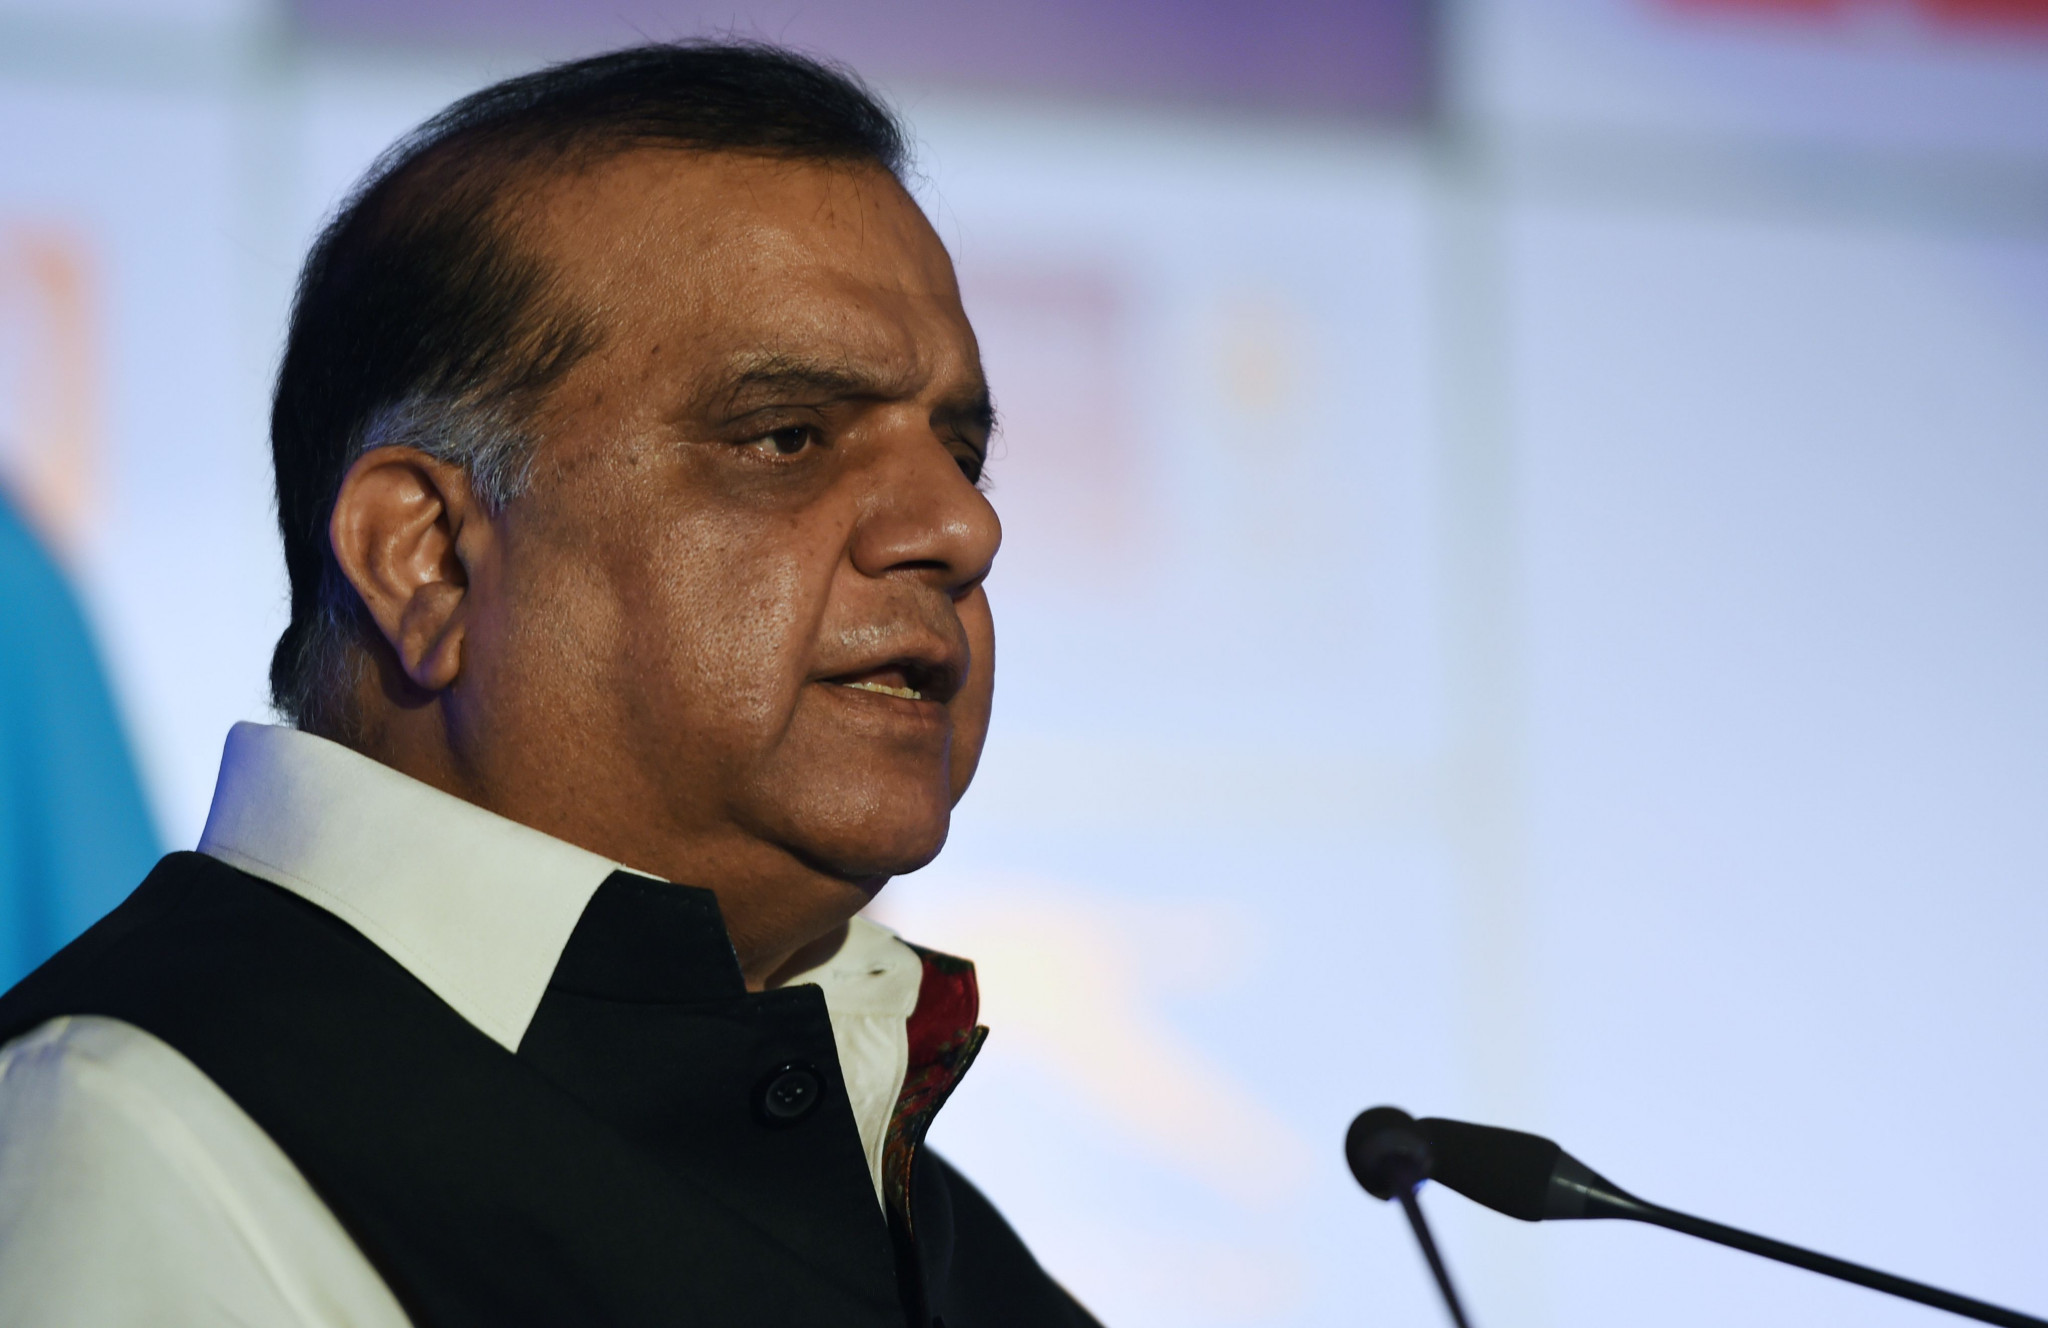 The Indian Olympic Association, whose President is Narinder Batra, has submitted a formal expression of interest to bid for the 2032 Olympic and Paralympic Games ©Getty Images